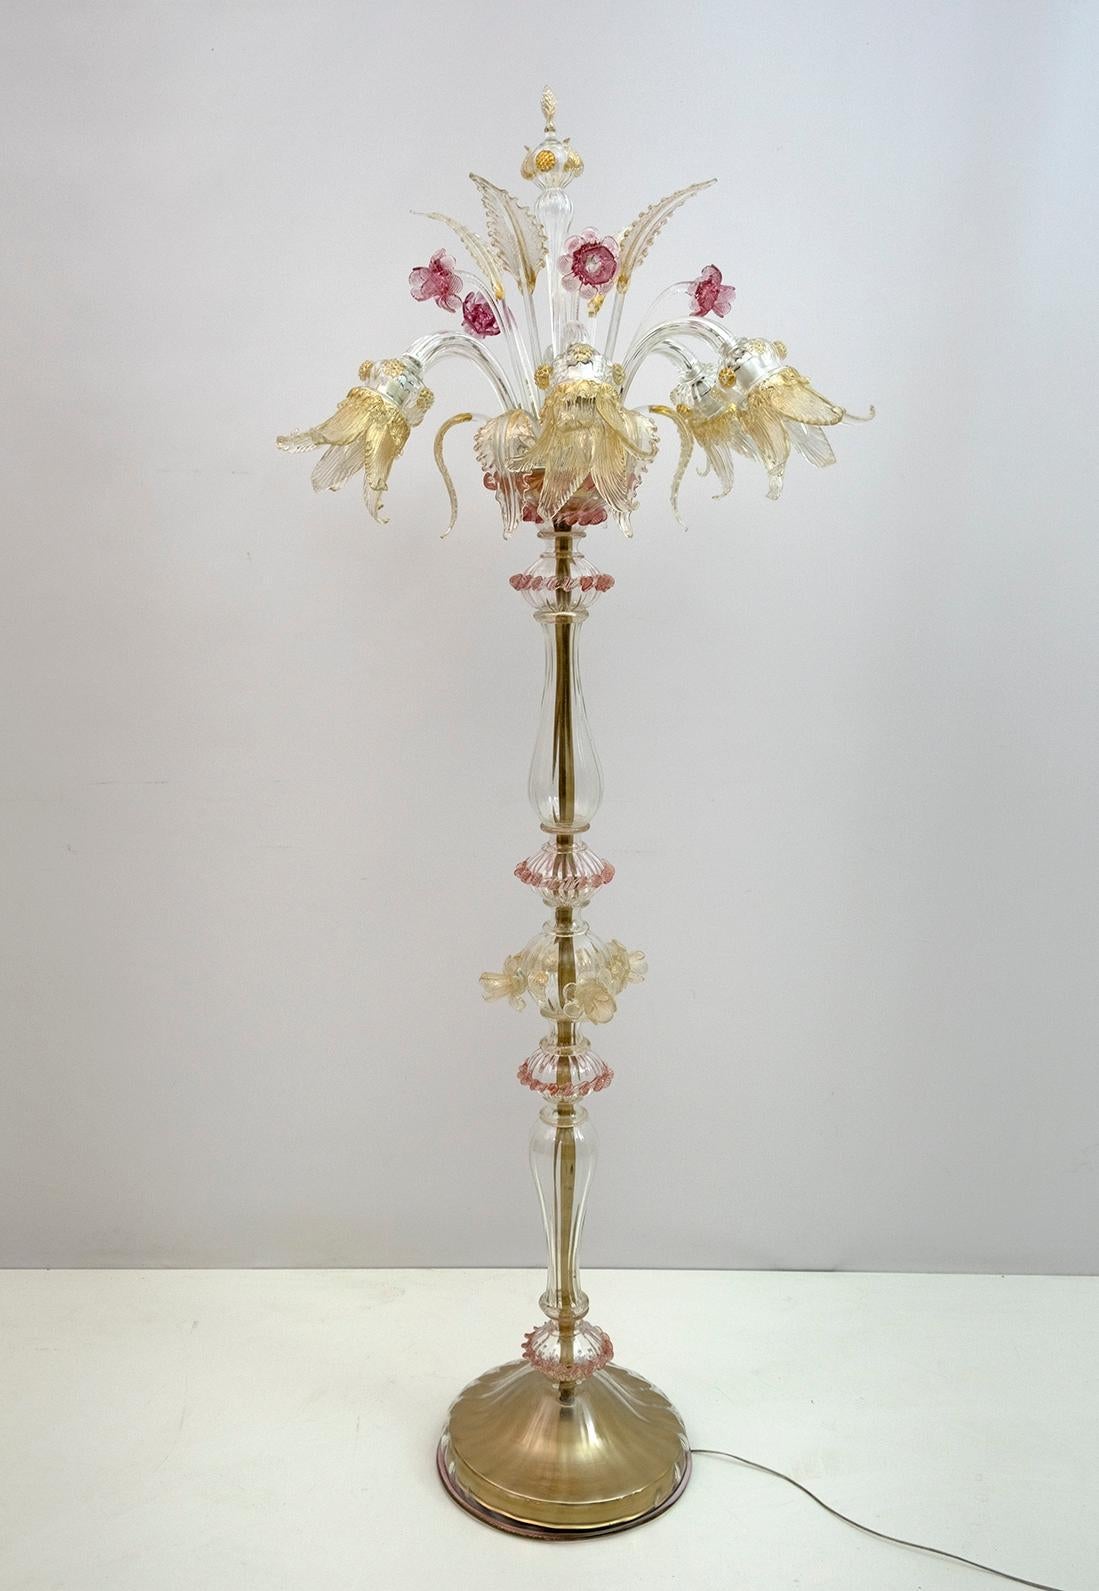 An elegant six-light floor lamp in Murano glass with transparent colors and sophisticated finishes in pink and ivory. With a centered bulbous column that emits branches and flowers and finely cuts the leaves of Murano glass. The glass is worked with